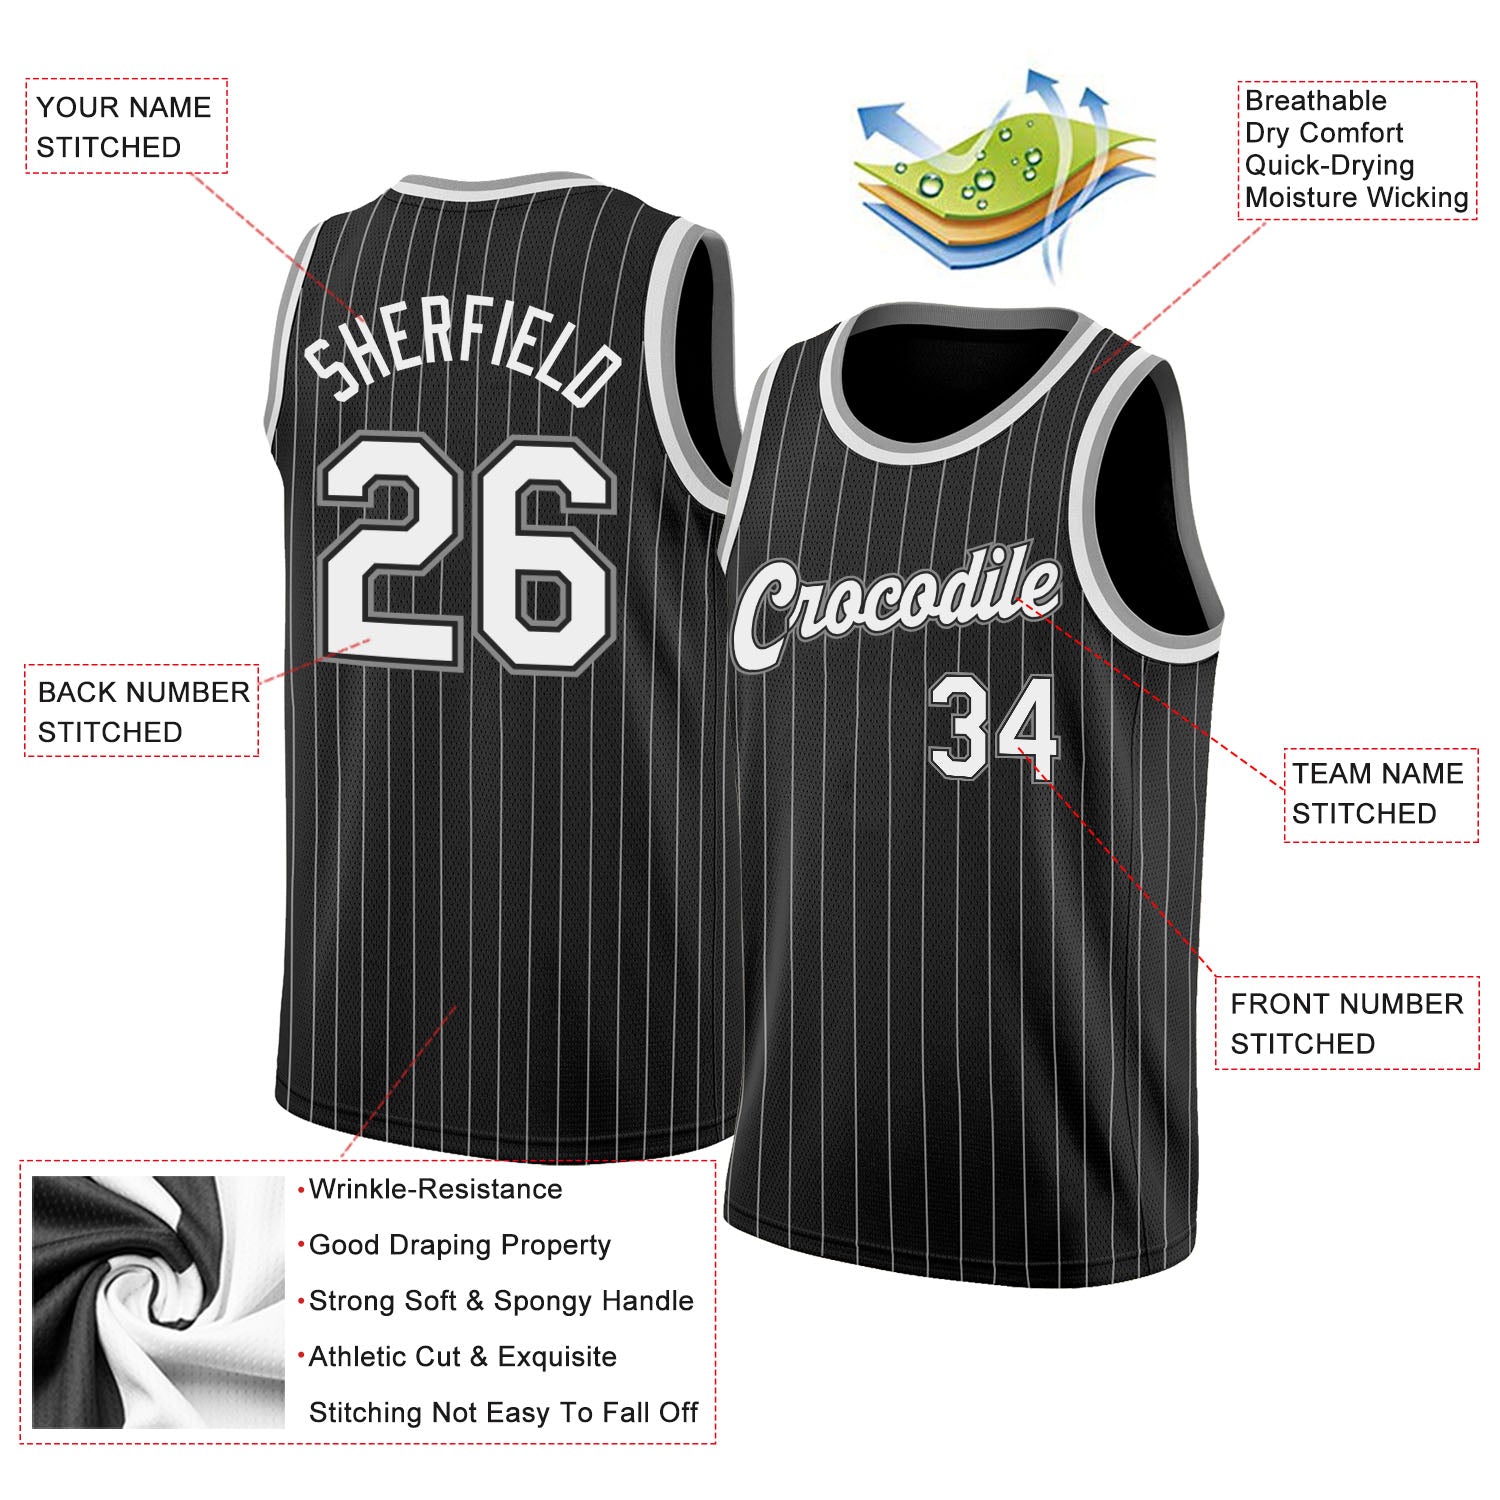 SPURS 18 BASKETBALL PLAYER NEW TRENDY JERSEY FREE CUSTOMIZE OF NAME AND  NUMBER ONLY full sublimation high quality fabrics